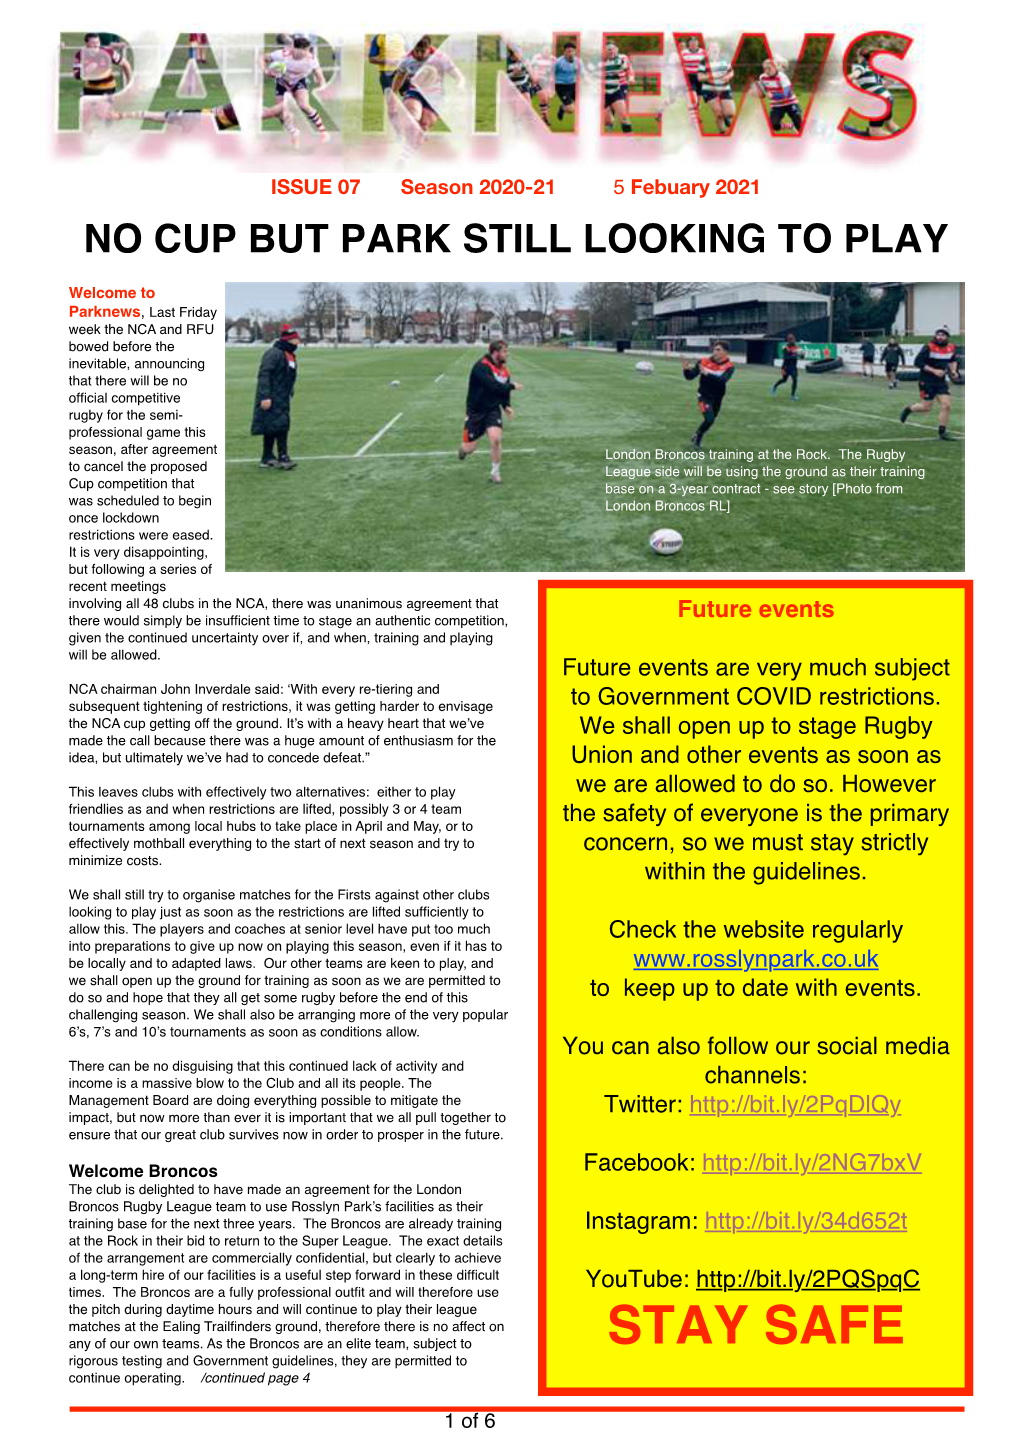 Parknews 5 February 2021 Online Here